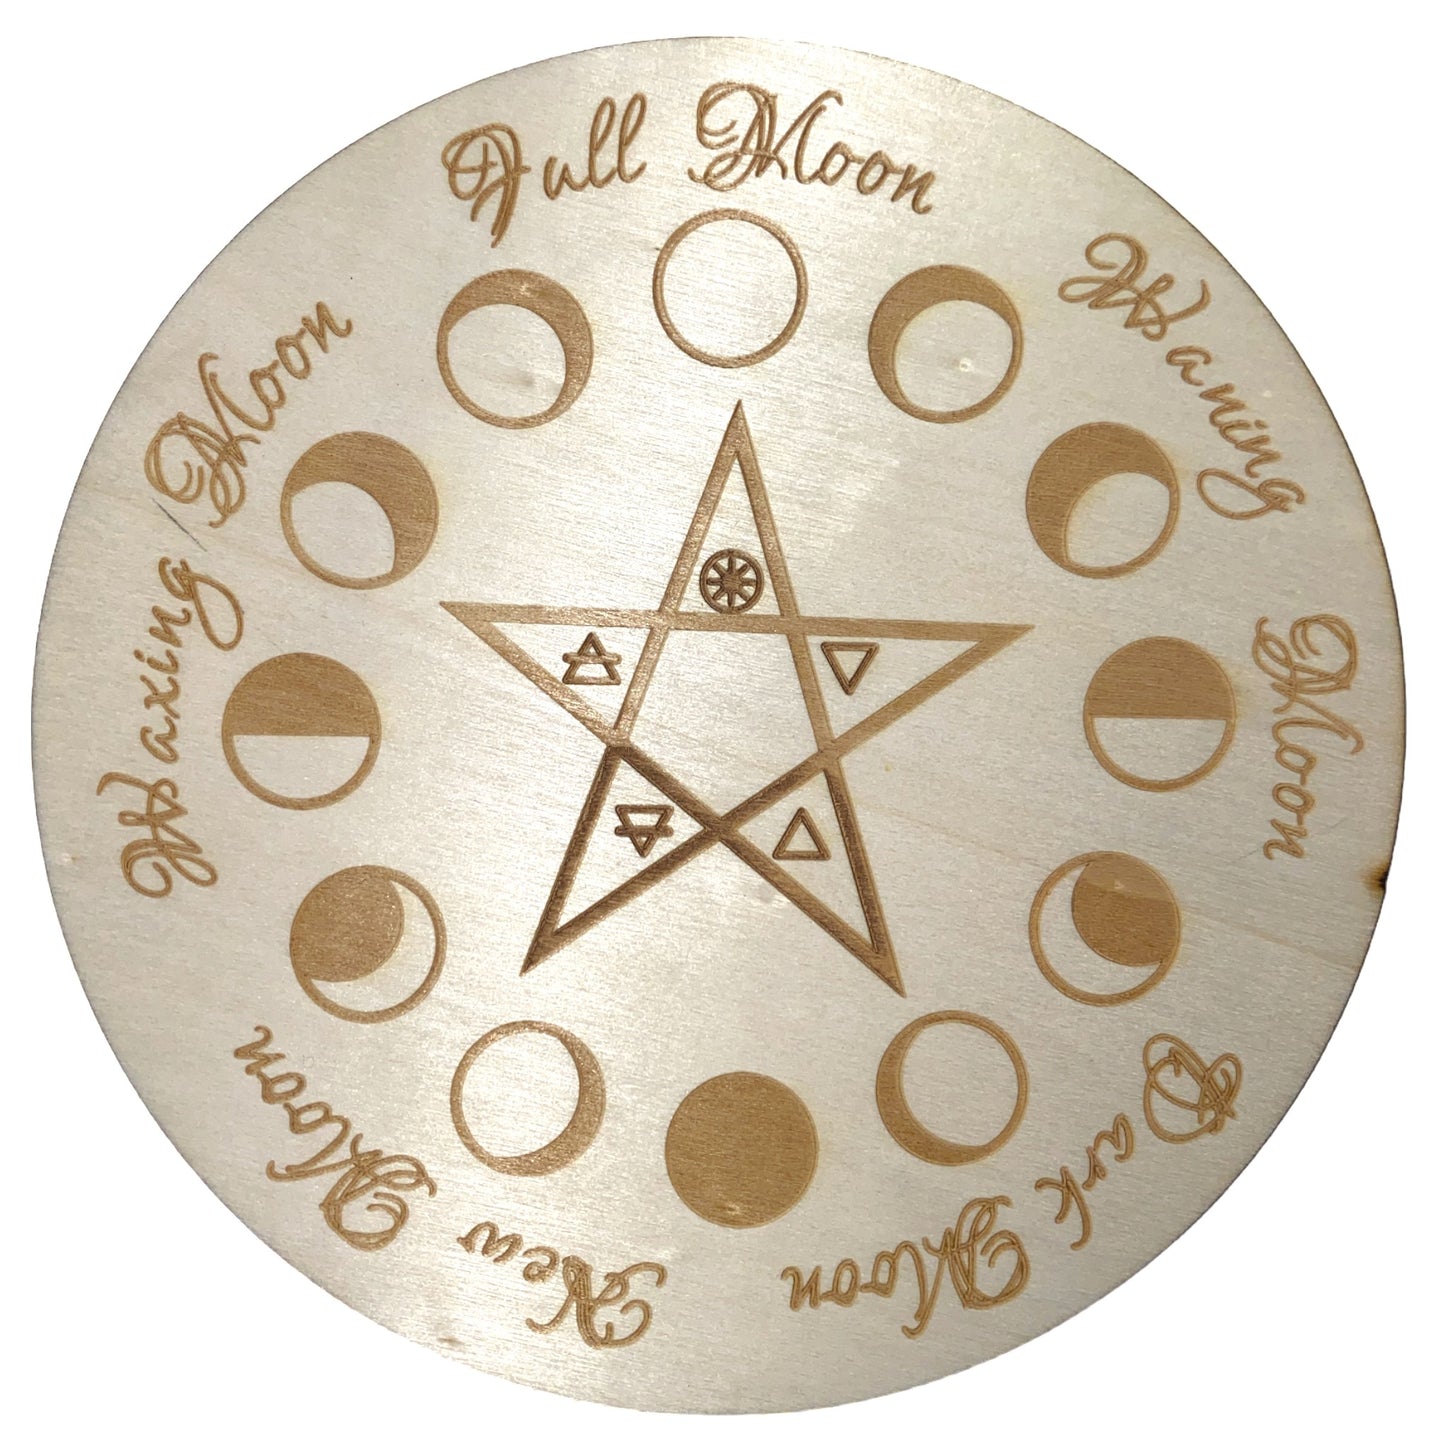 Star with Moon Phases - Wood Hot Pad - Pendulum Charging Plate - Natural - 20cm - 7.75 inch - Made in China - NEW423